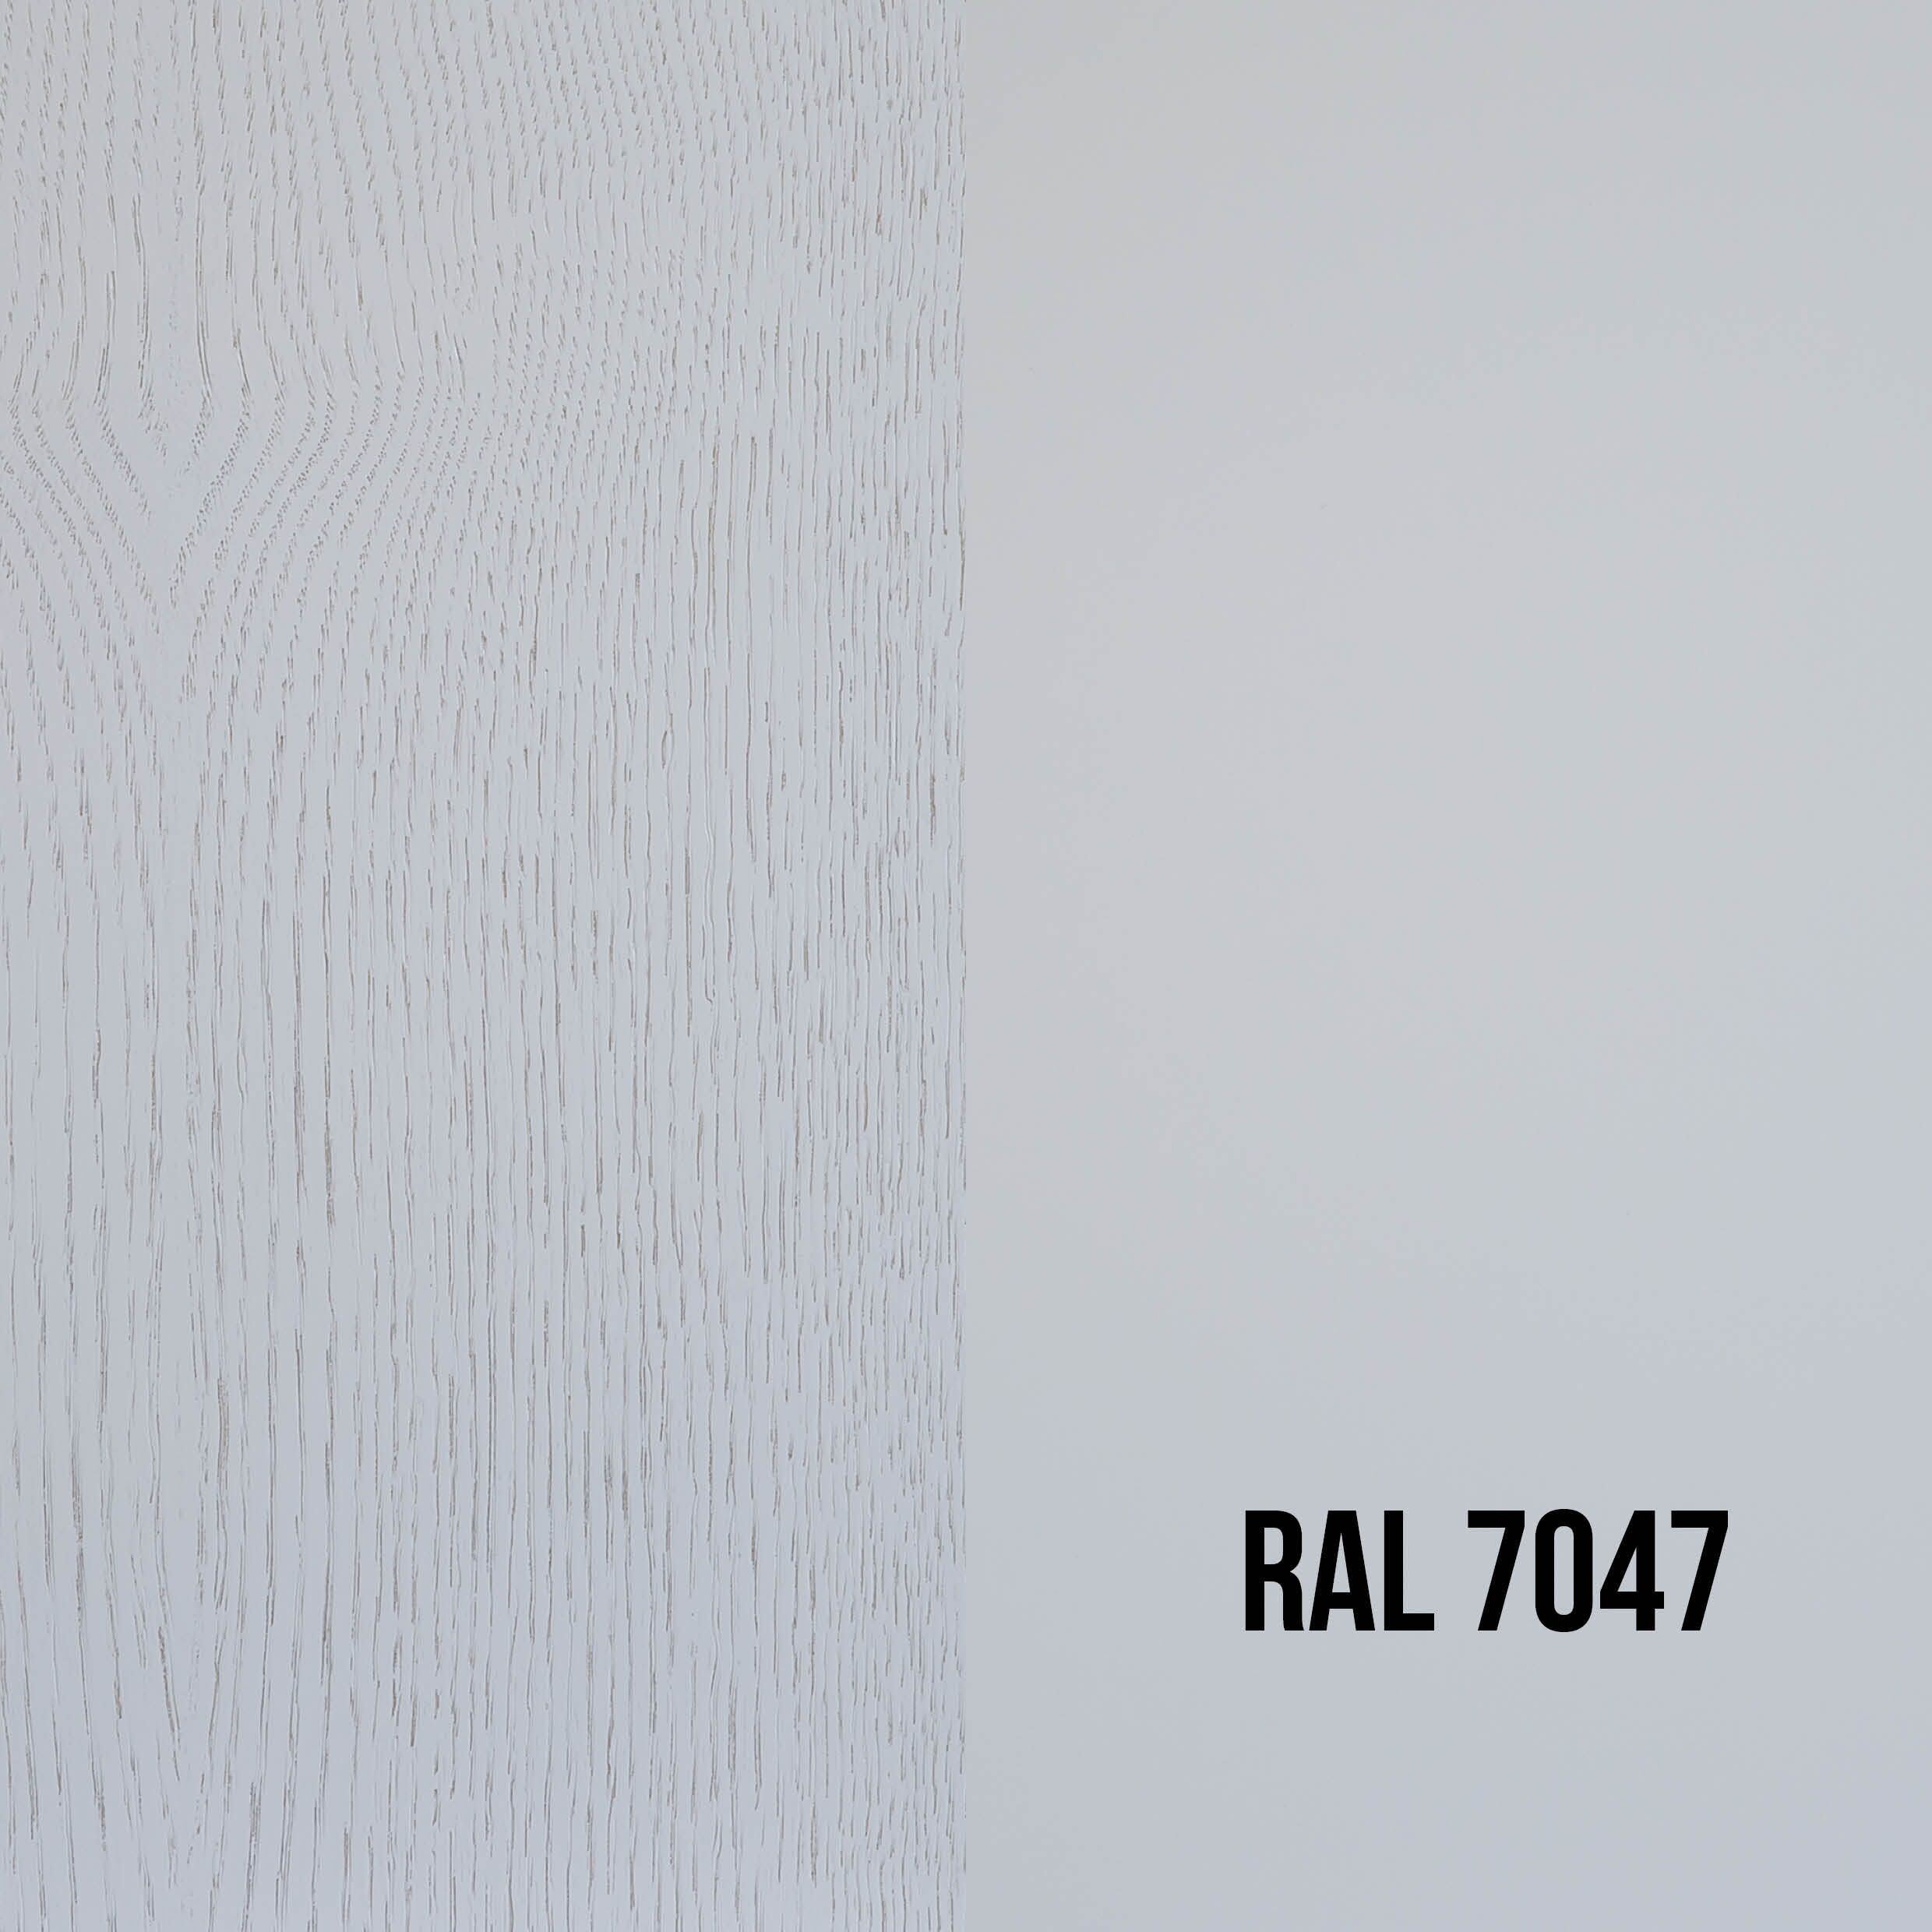 RAL 7047